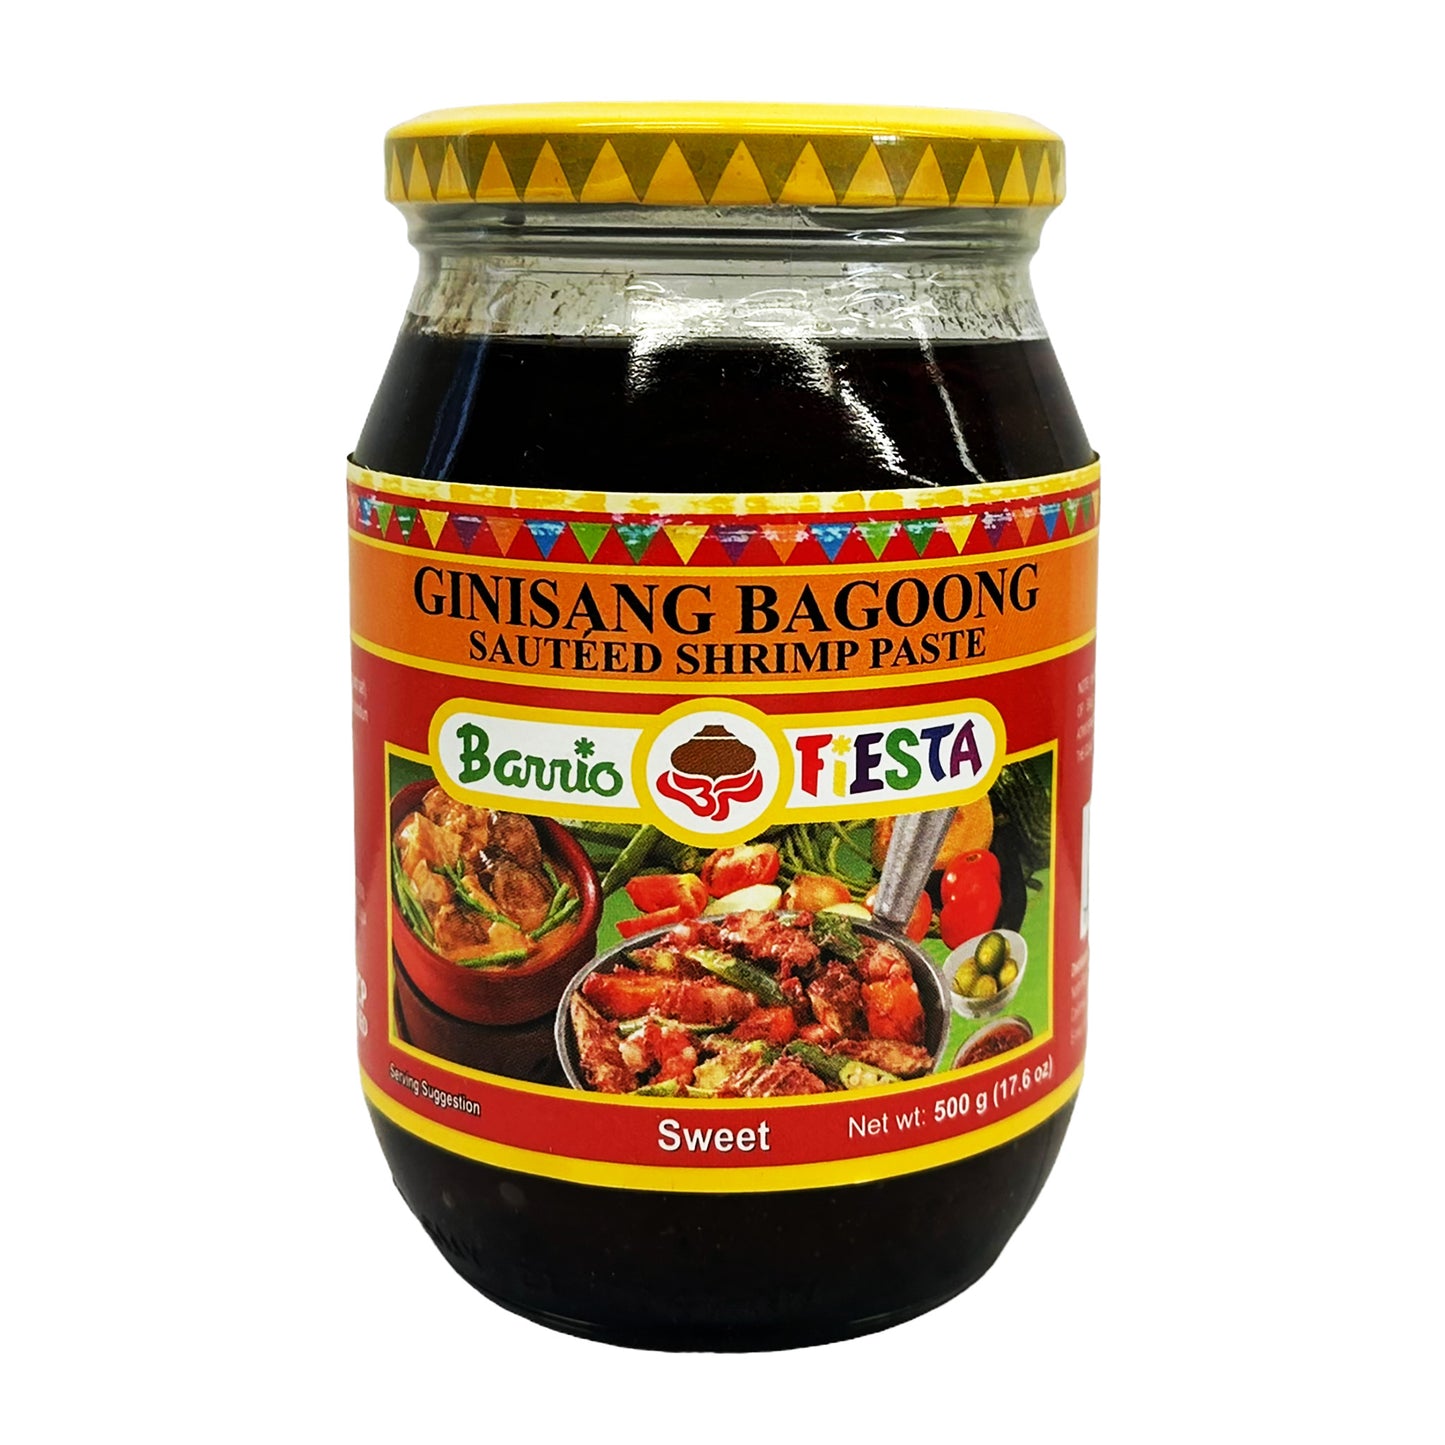 Front graphic image of Barrio Fiesta Sauteed Shrimp Paste - Ginisang Bagoong Sweet 17.65oz